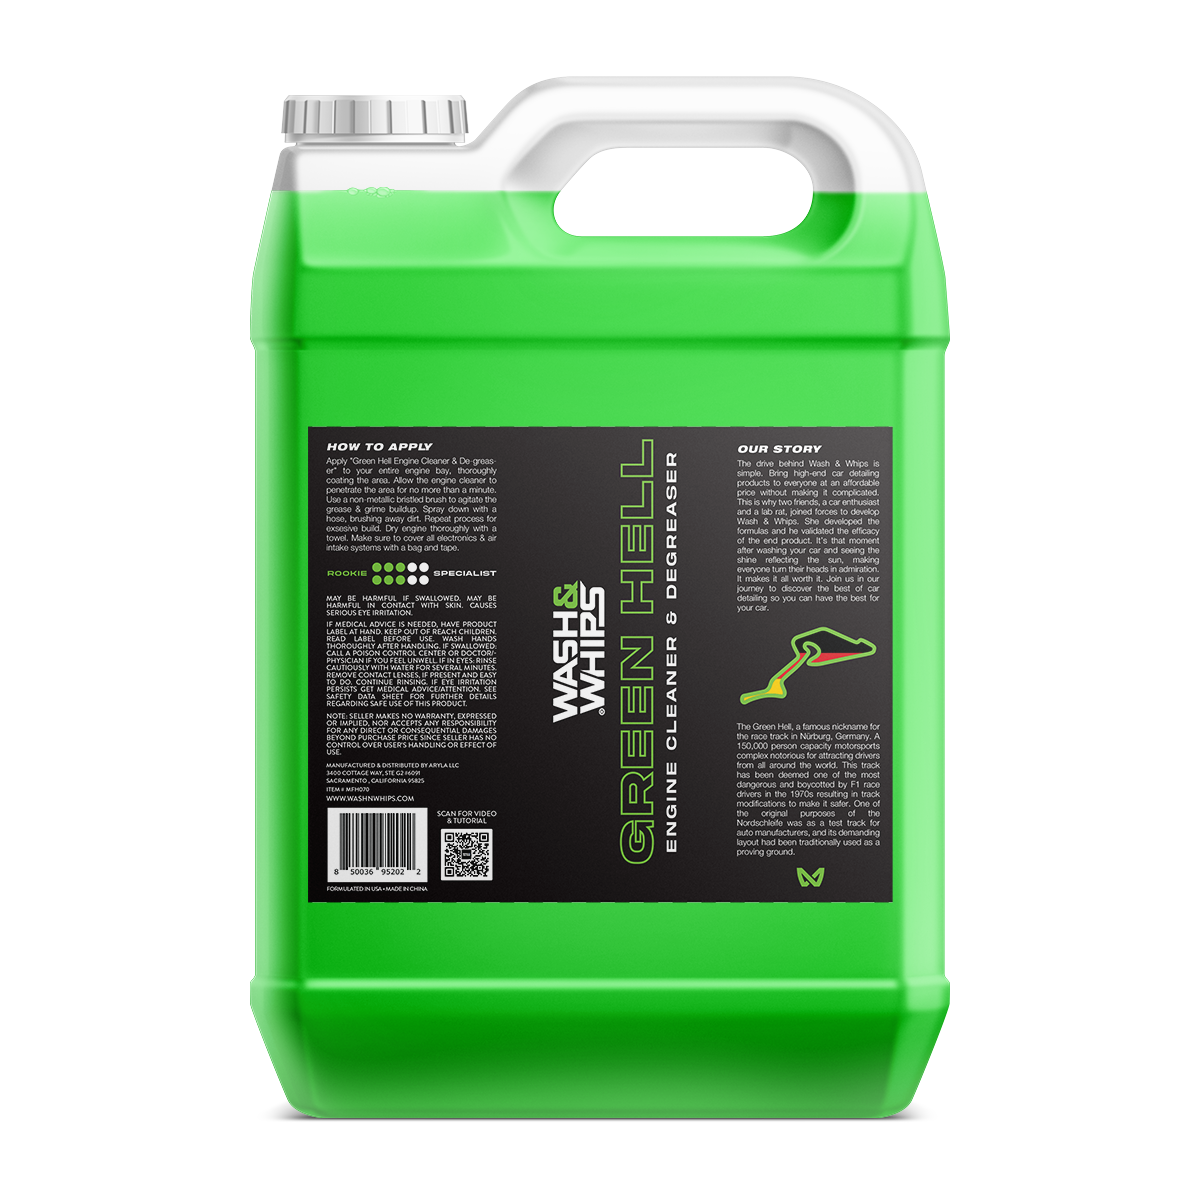  WASH&WHIPS Green Hell Engine Machine Cleaner